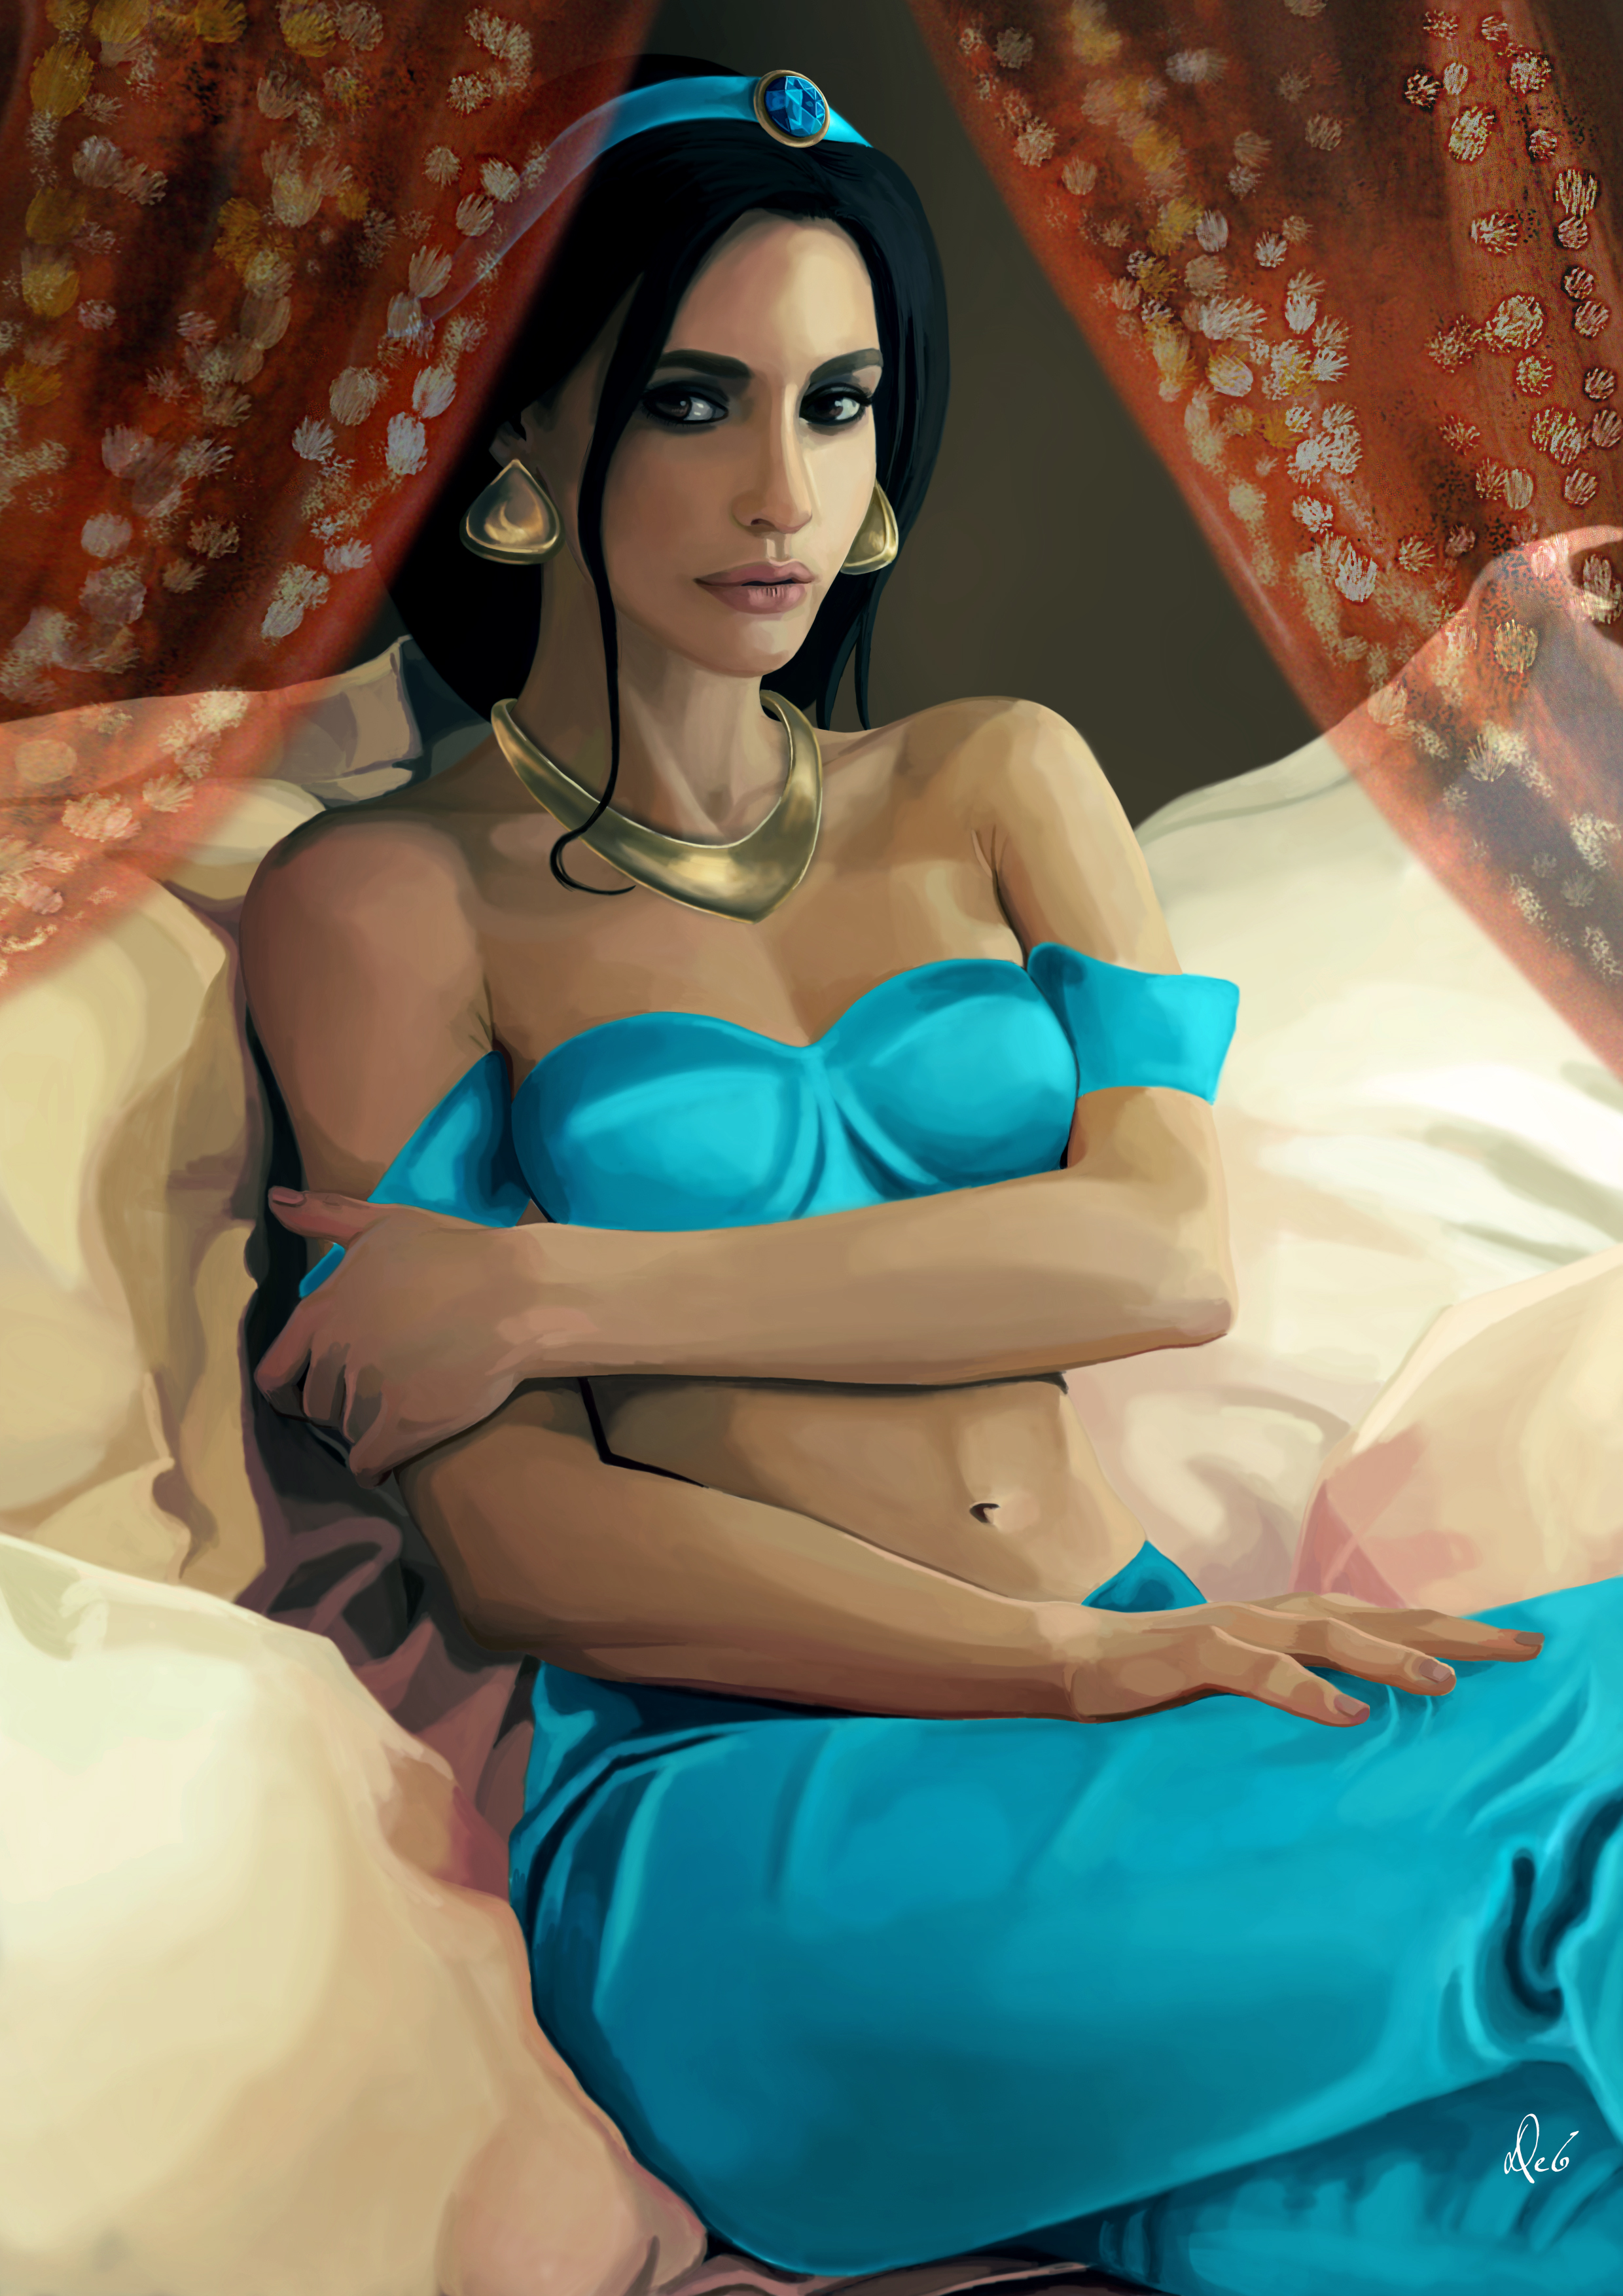 Another fan art this time again on the Disney Universe with Aladdin's Princess...